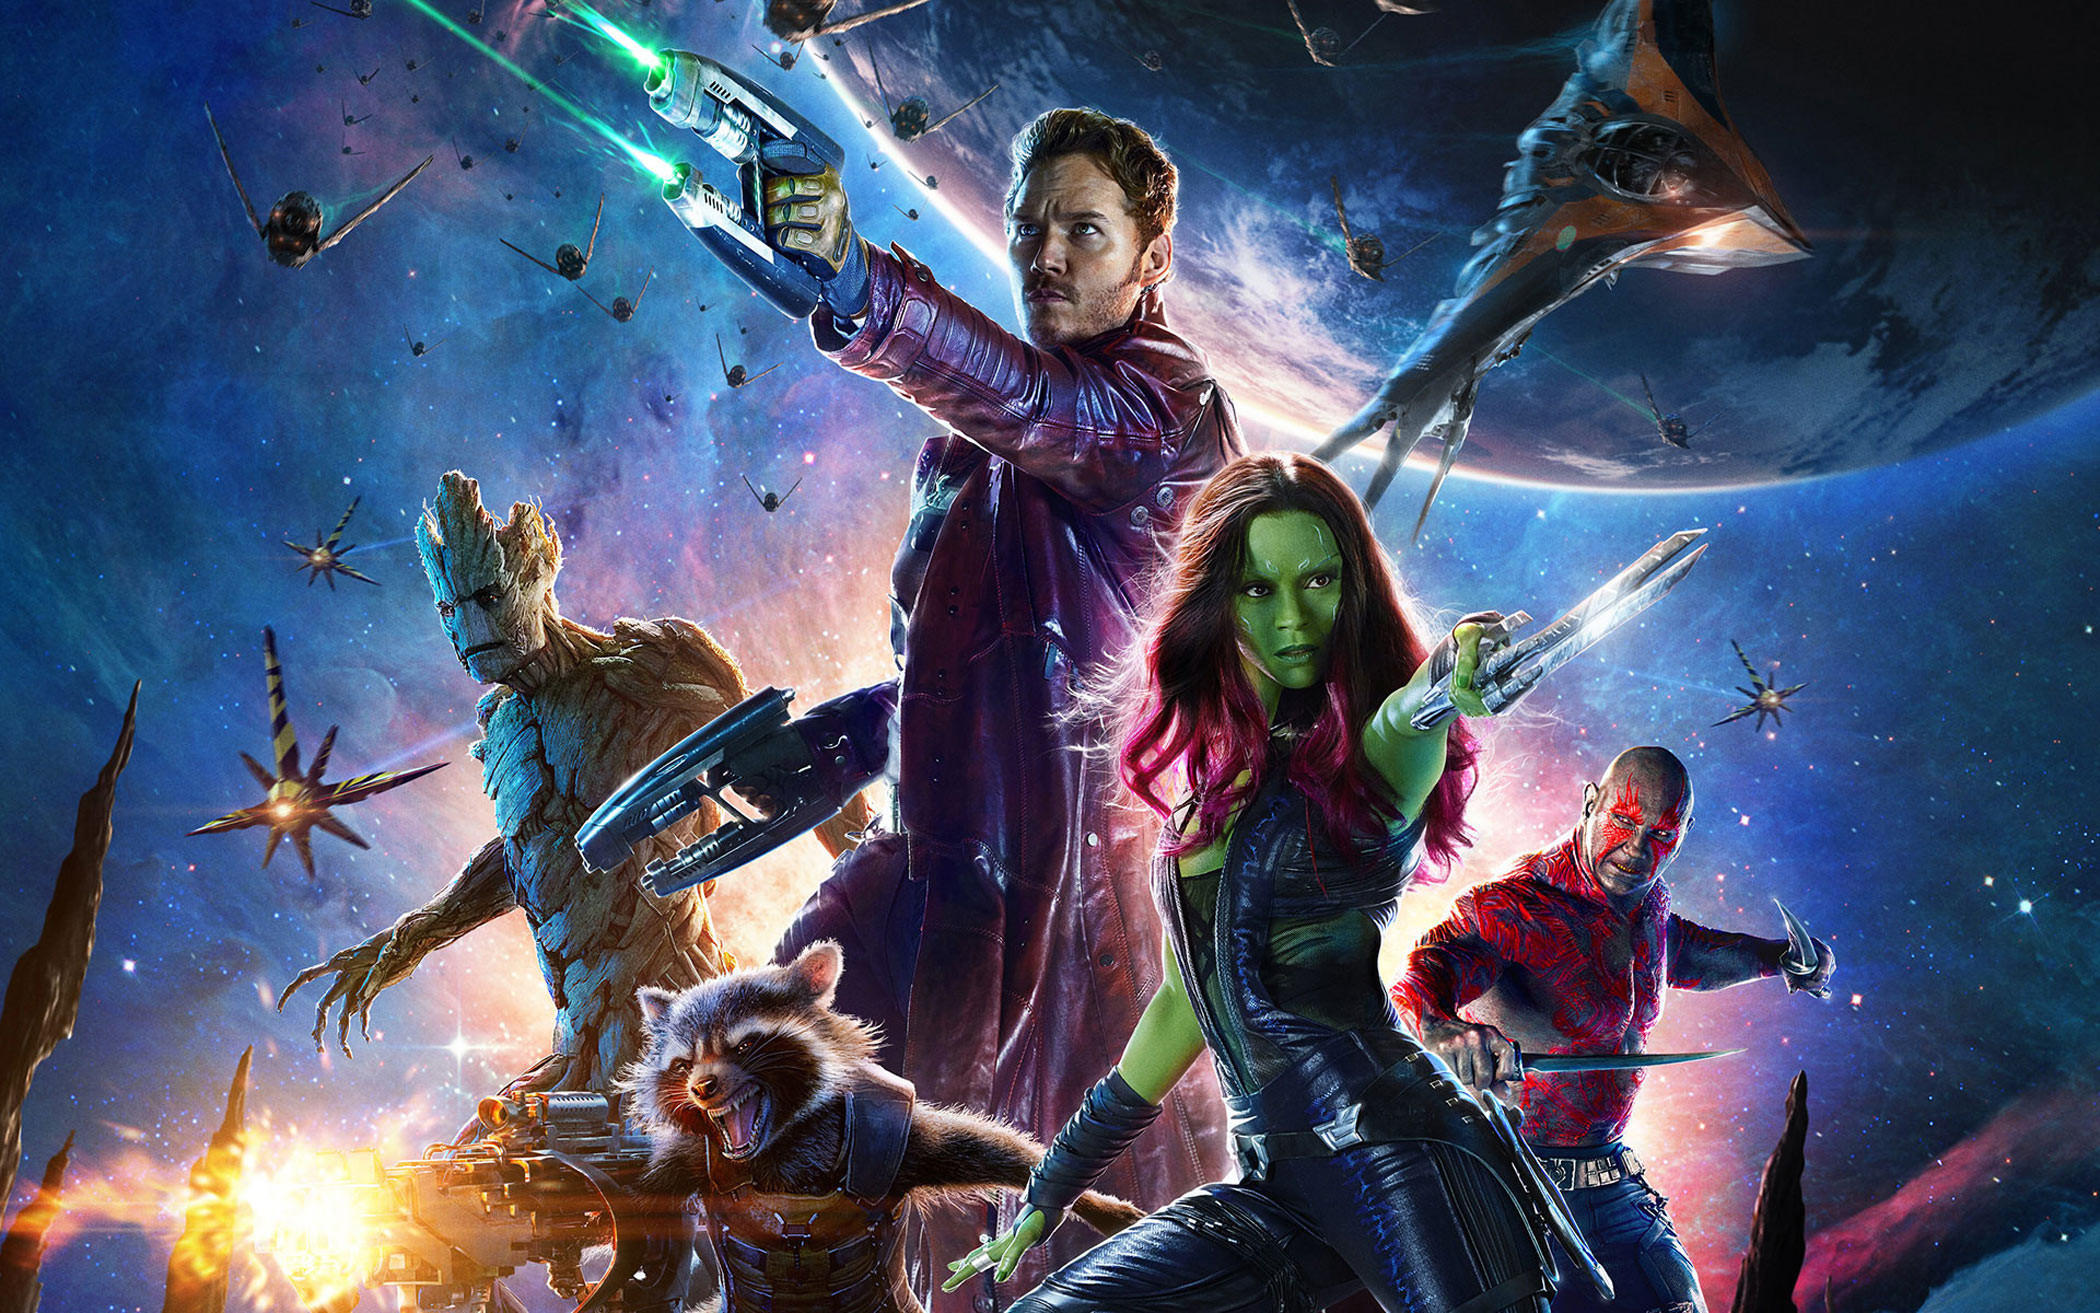 Guardians of the Galaxy awesome mix vol.1 -04. David Bowie - Moonage Daydream